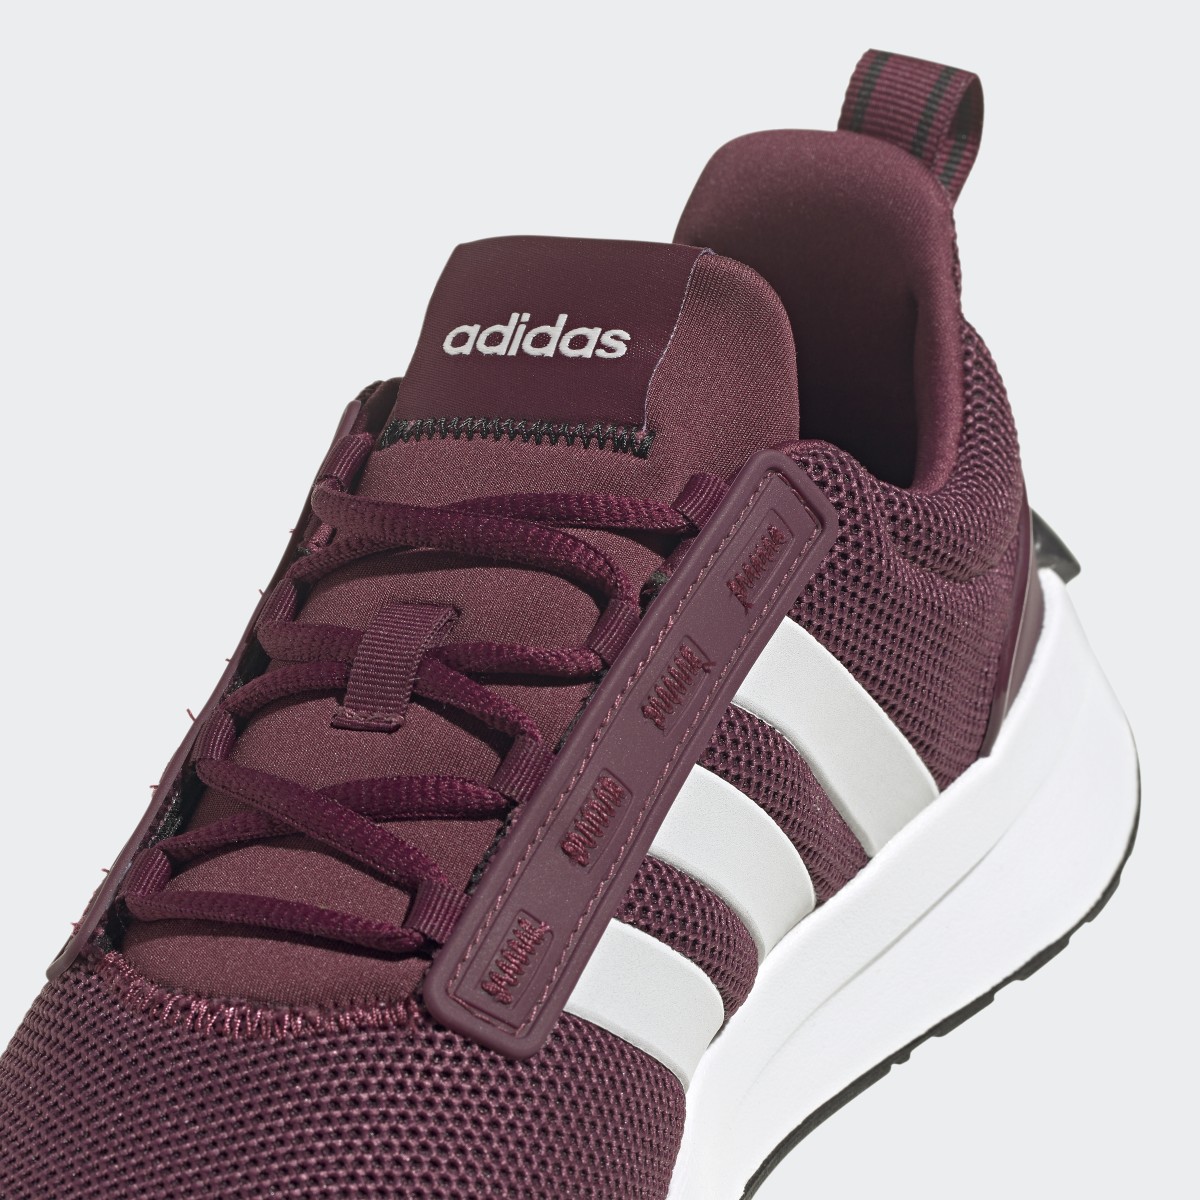 Adidas Racer TR21 Shoes. 8